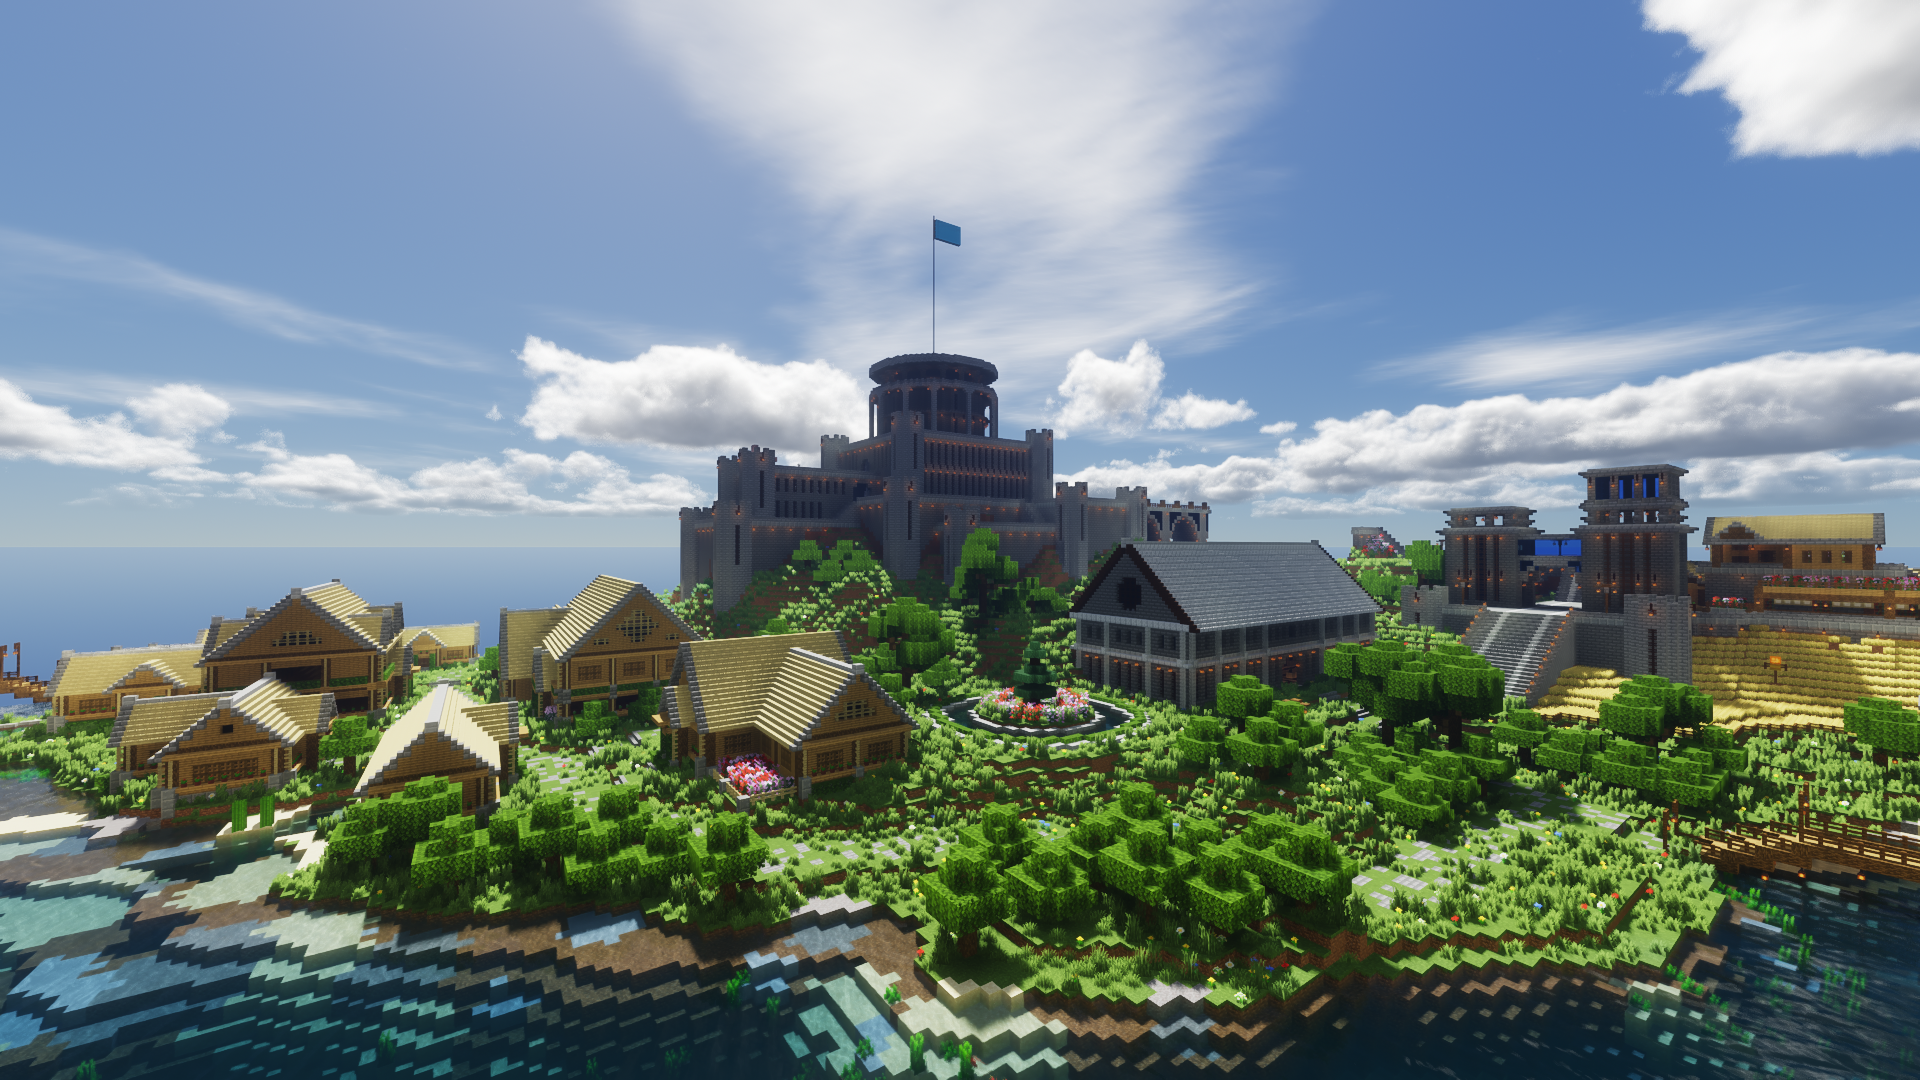 General 1920x1080 building Minecraft video games CGI clouds village castle flag water sky